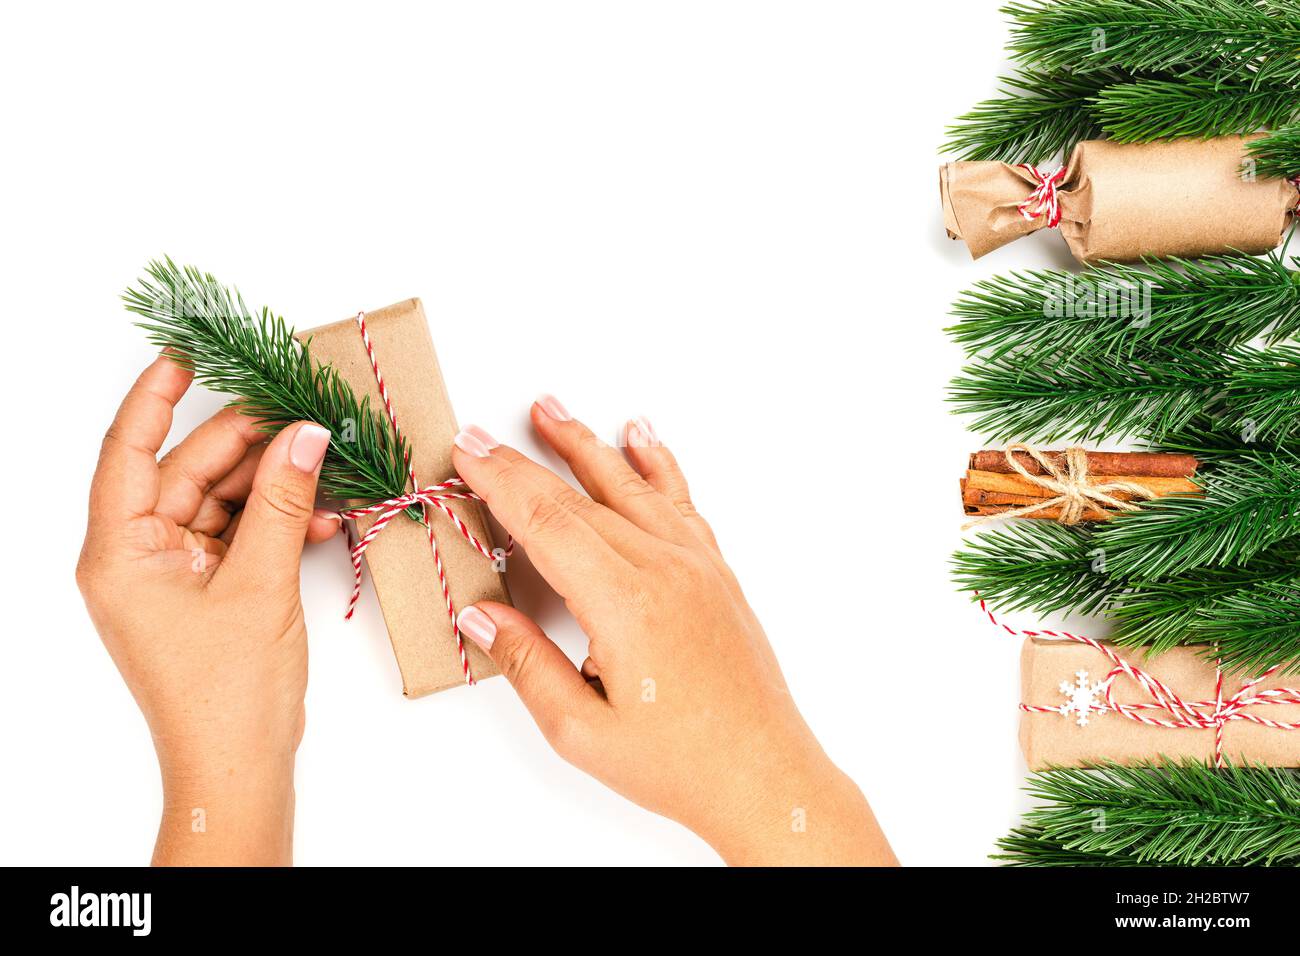 the process of decorating Christmas gift boxes, woman hands add sprig of Christmas tree for decoration Stock Photo